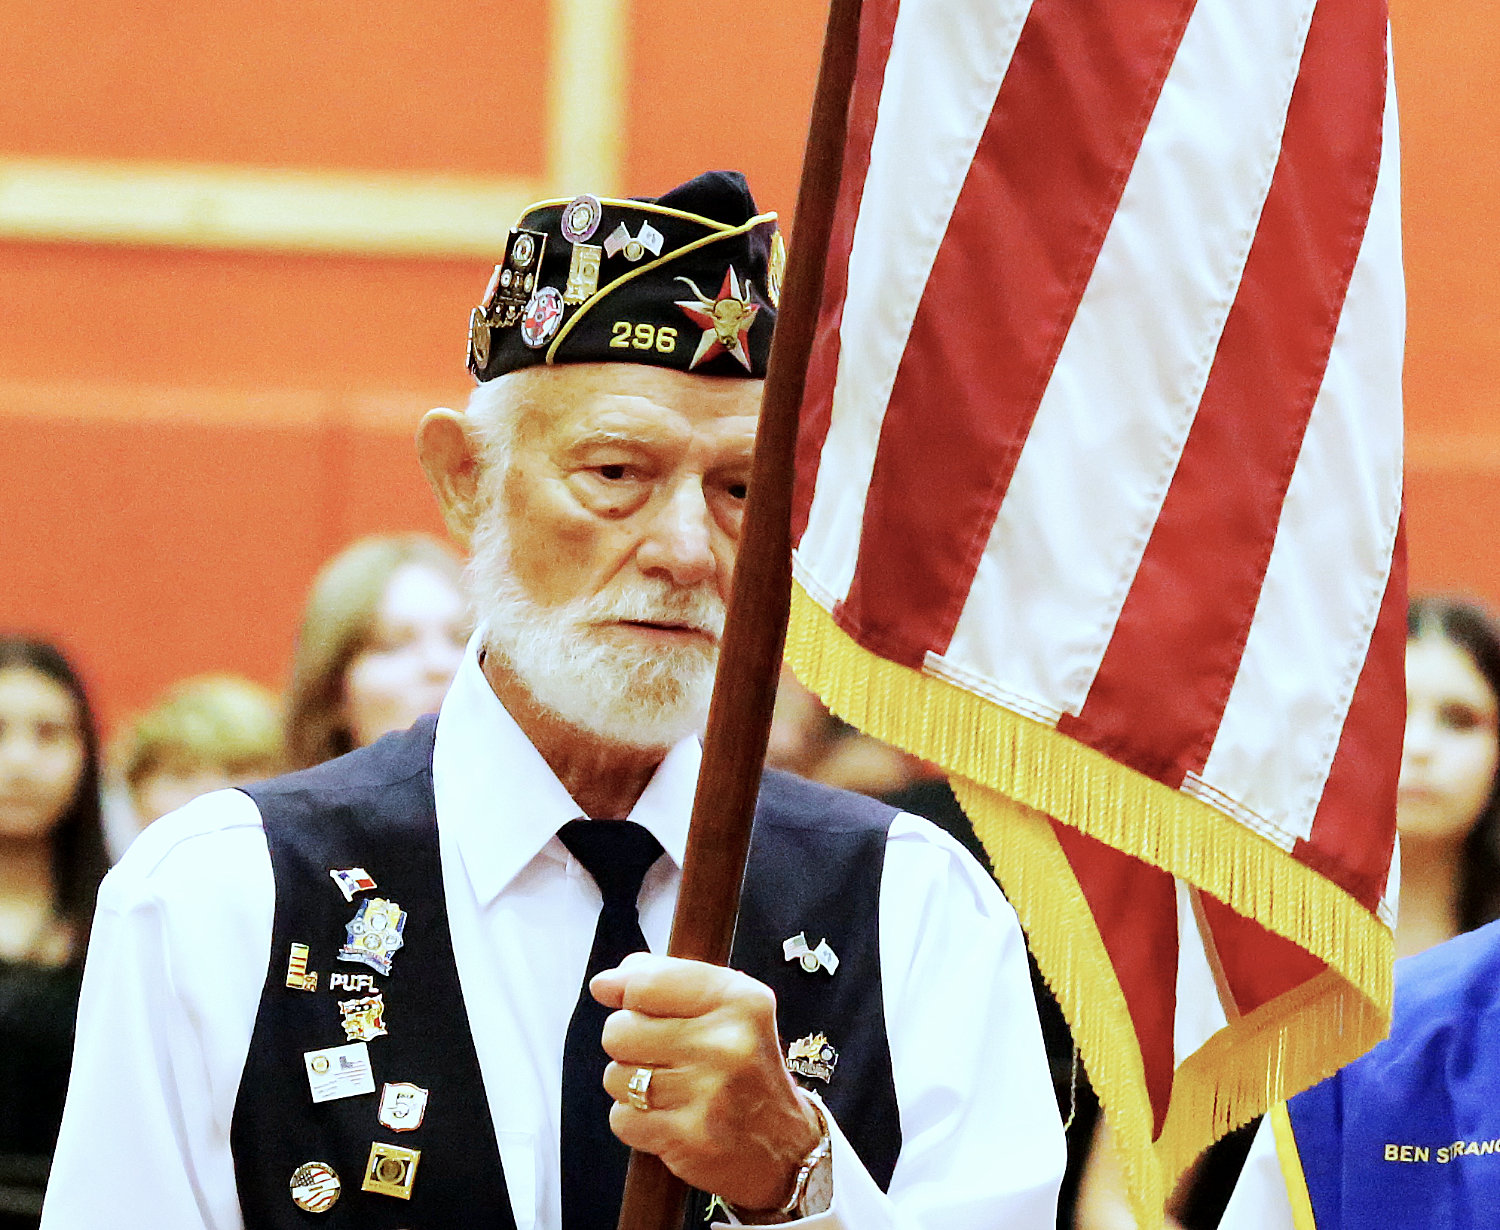 Members of American Legion Post 296 performed duties as color guard for the Mineola High School Veterans Day program. (Monitor photo by John Arbter)